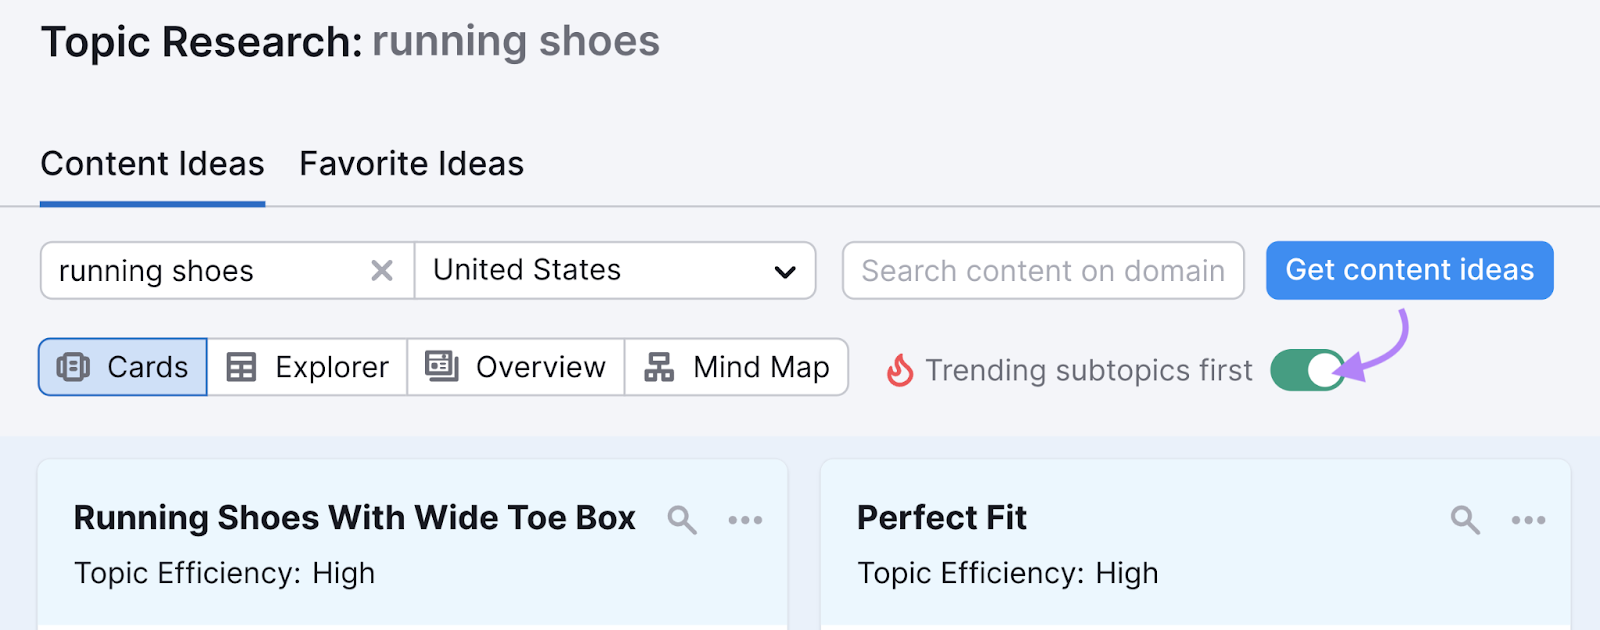 flame icon with" trending subtopics first" substance   followed by toggle button